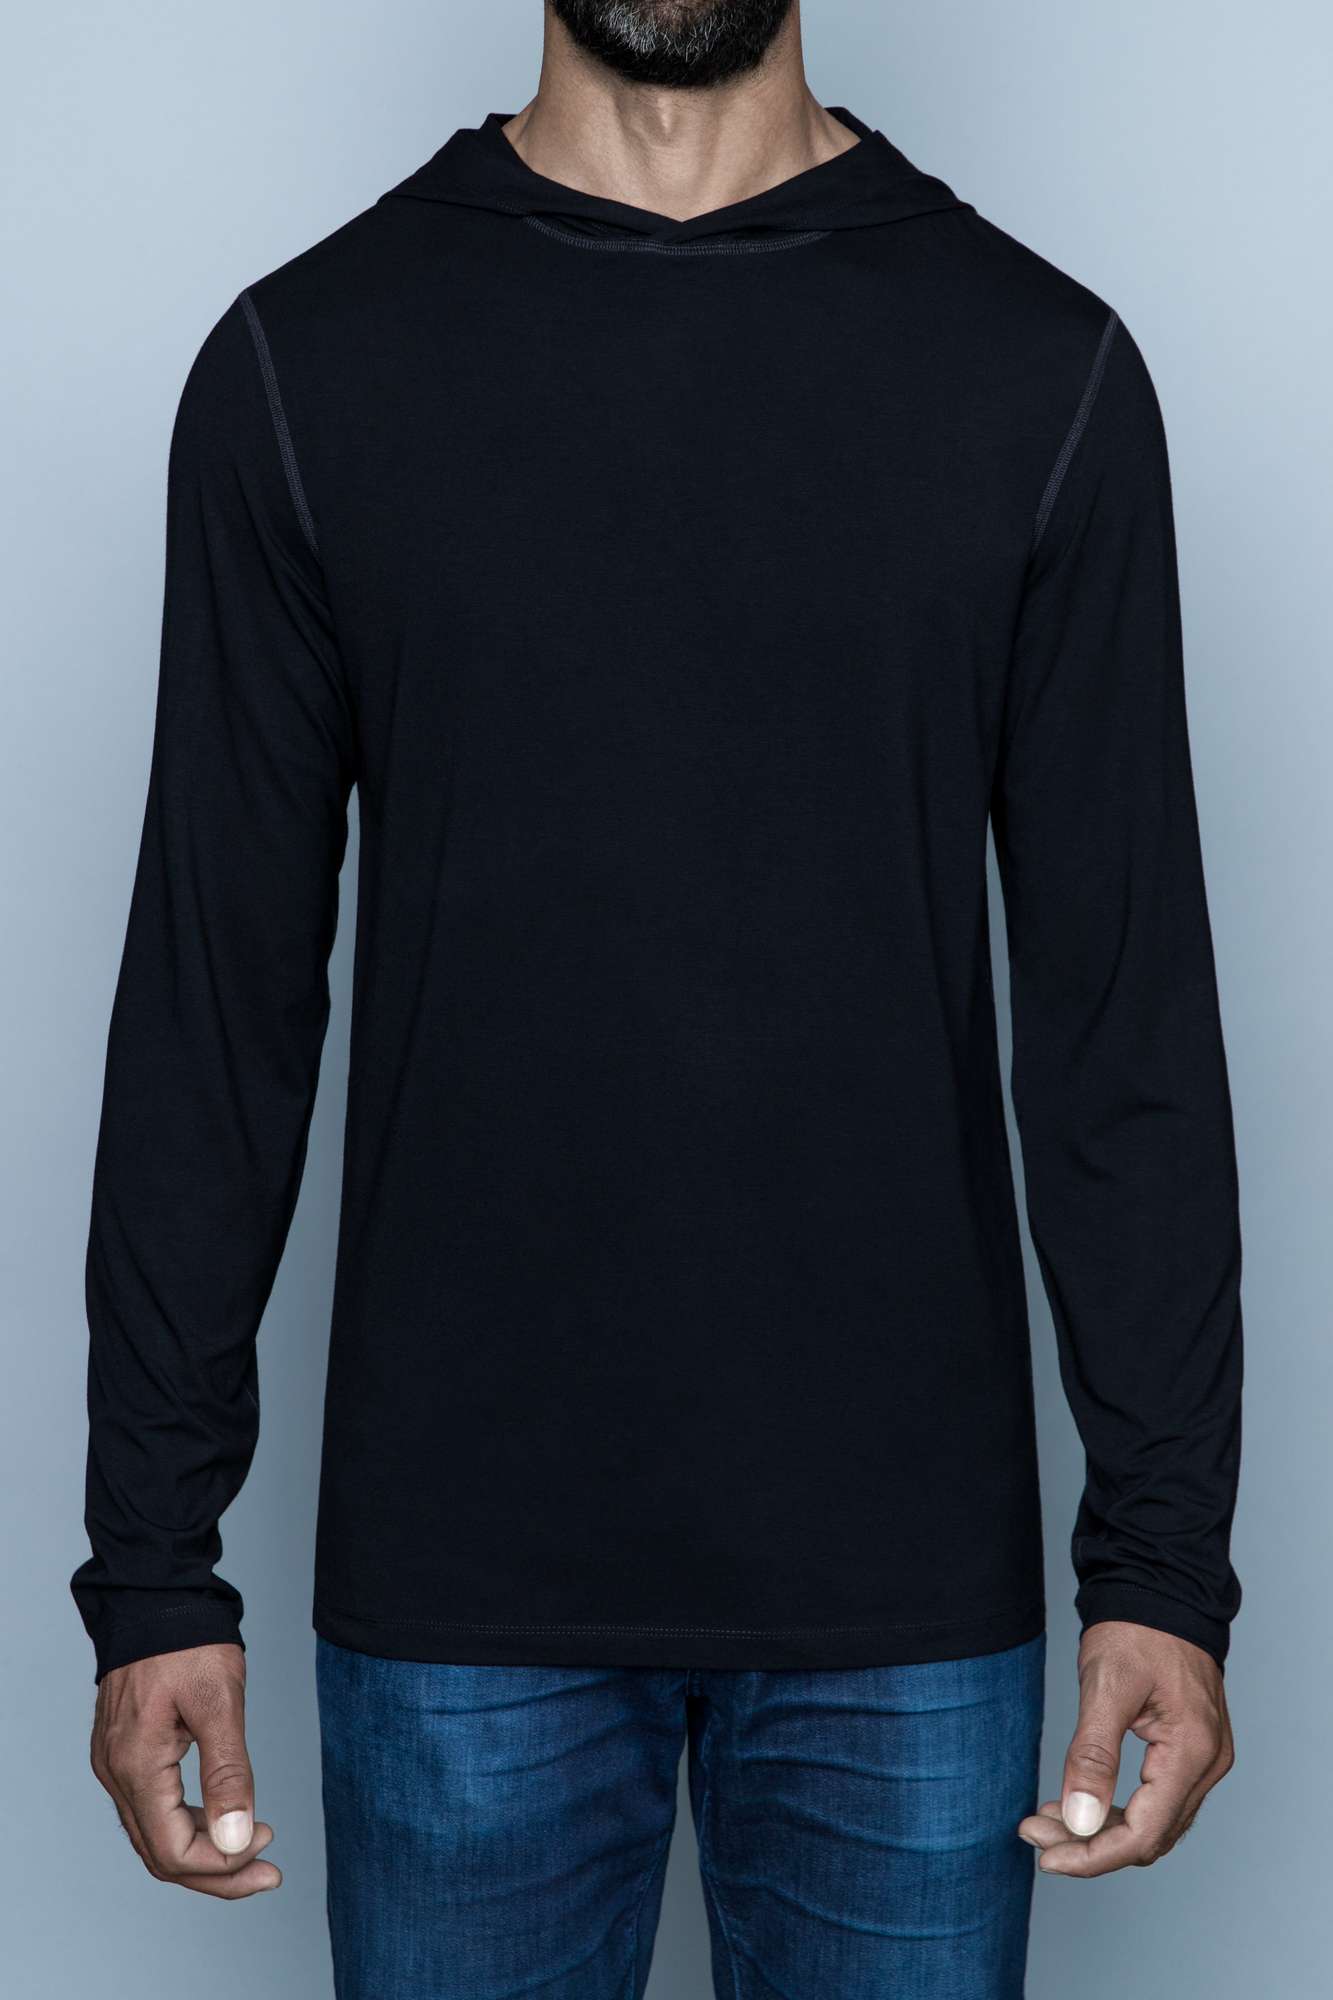 The Navas Lab Vasquez long-sleeve hooded shirt for tall guys in black. The perfect tall slim shirt for tall and slim guys looking for style and comfort.